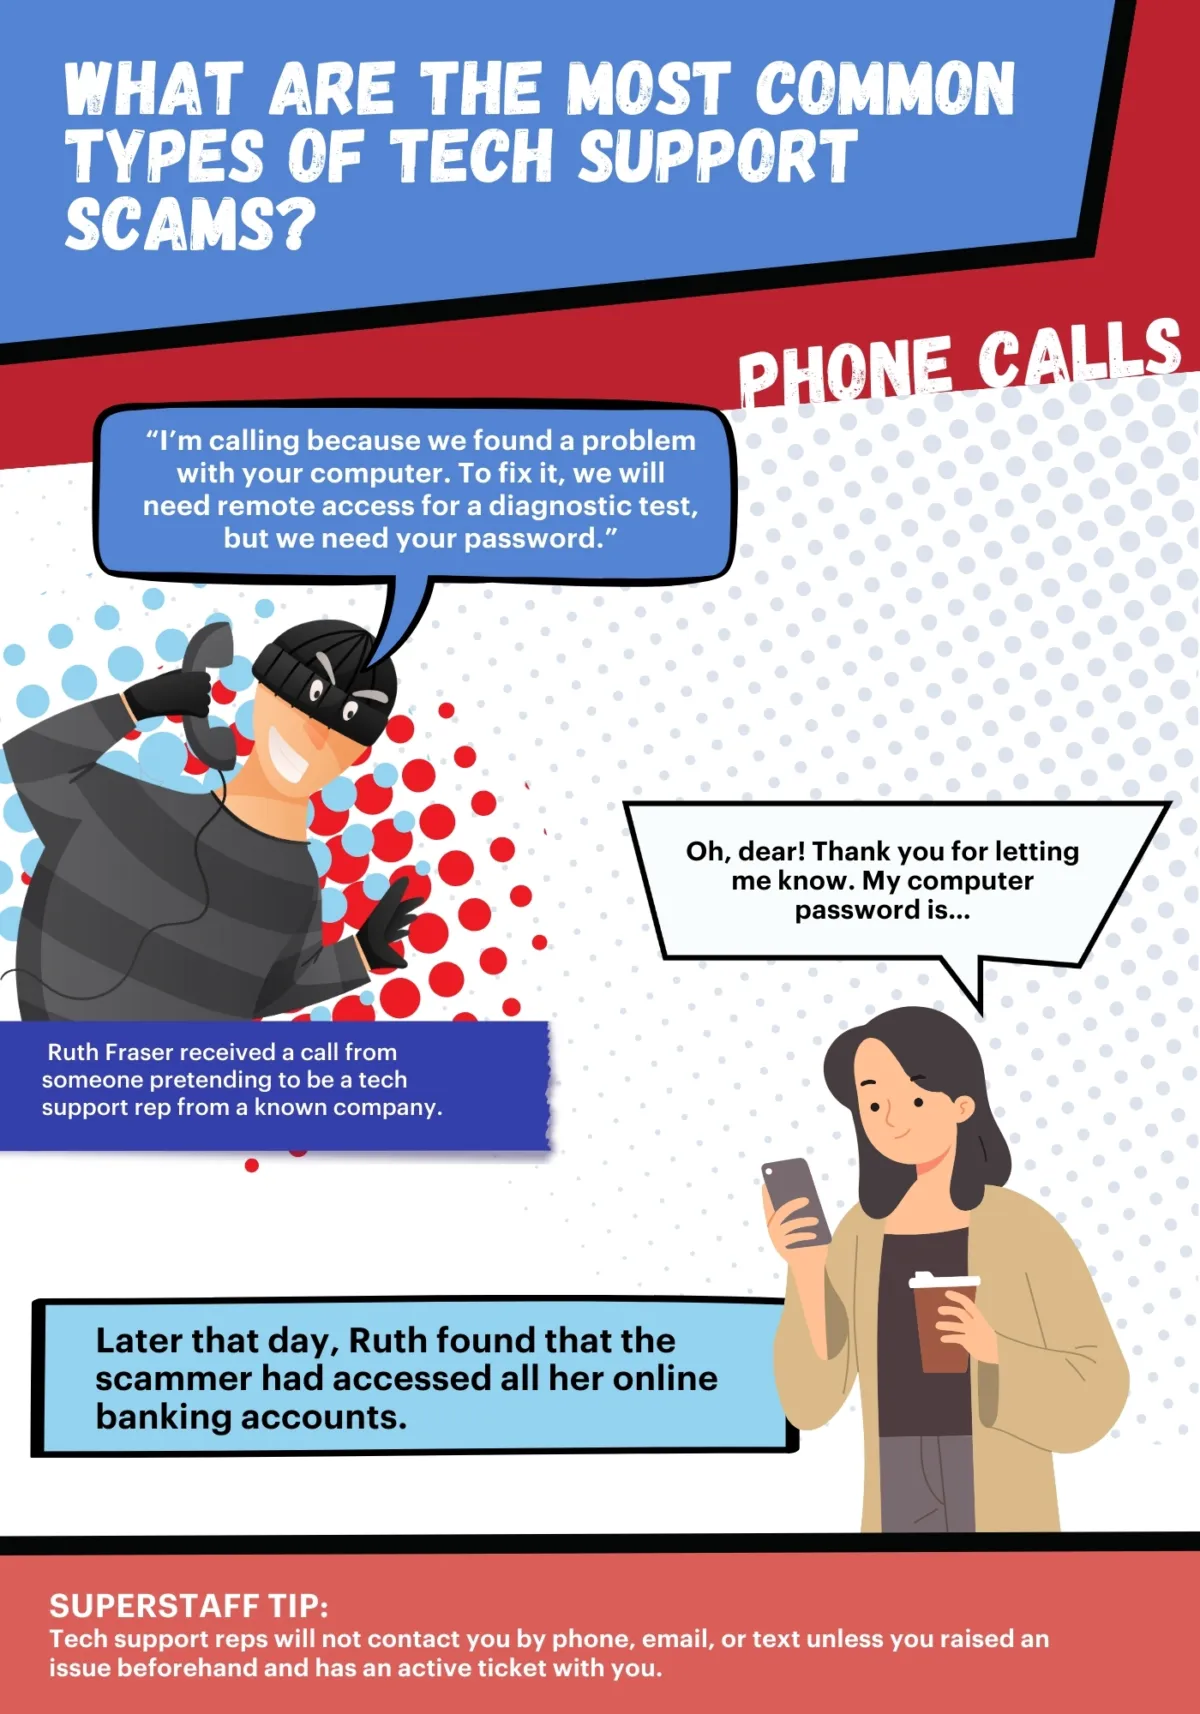 A comic strip shows how scammers use phone calls to commit tech support fraud.